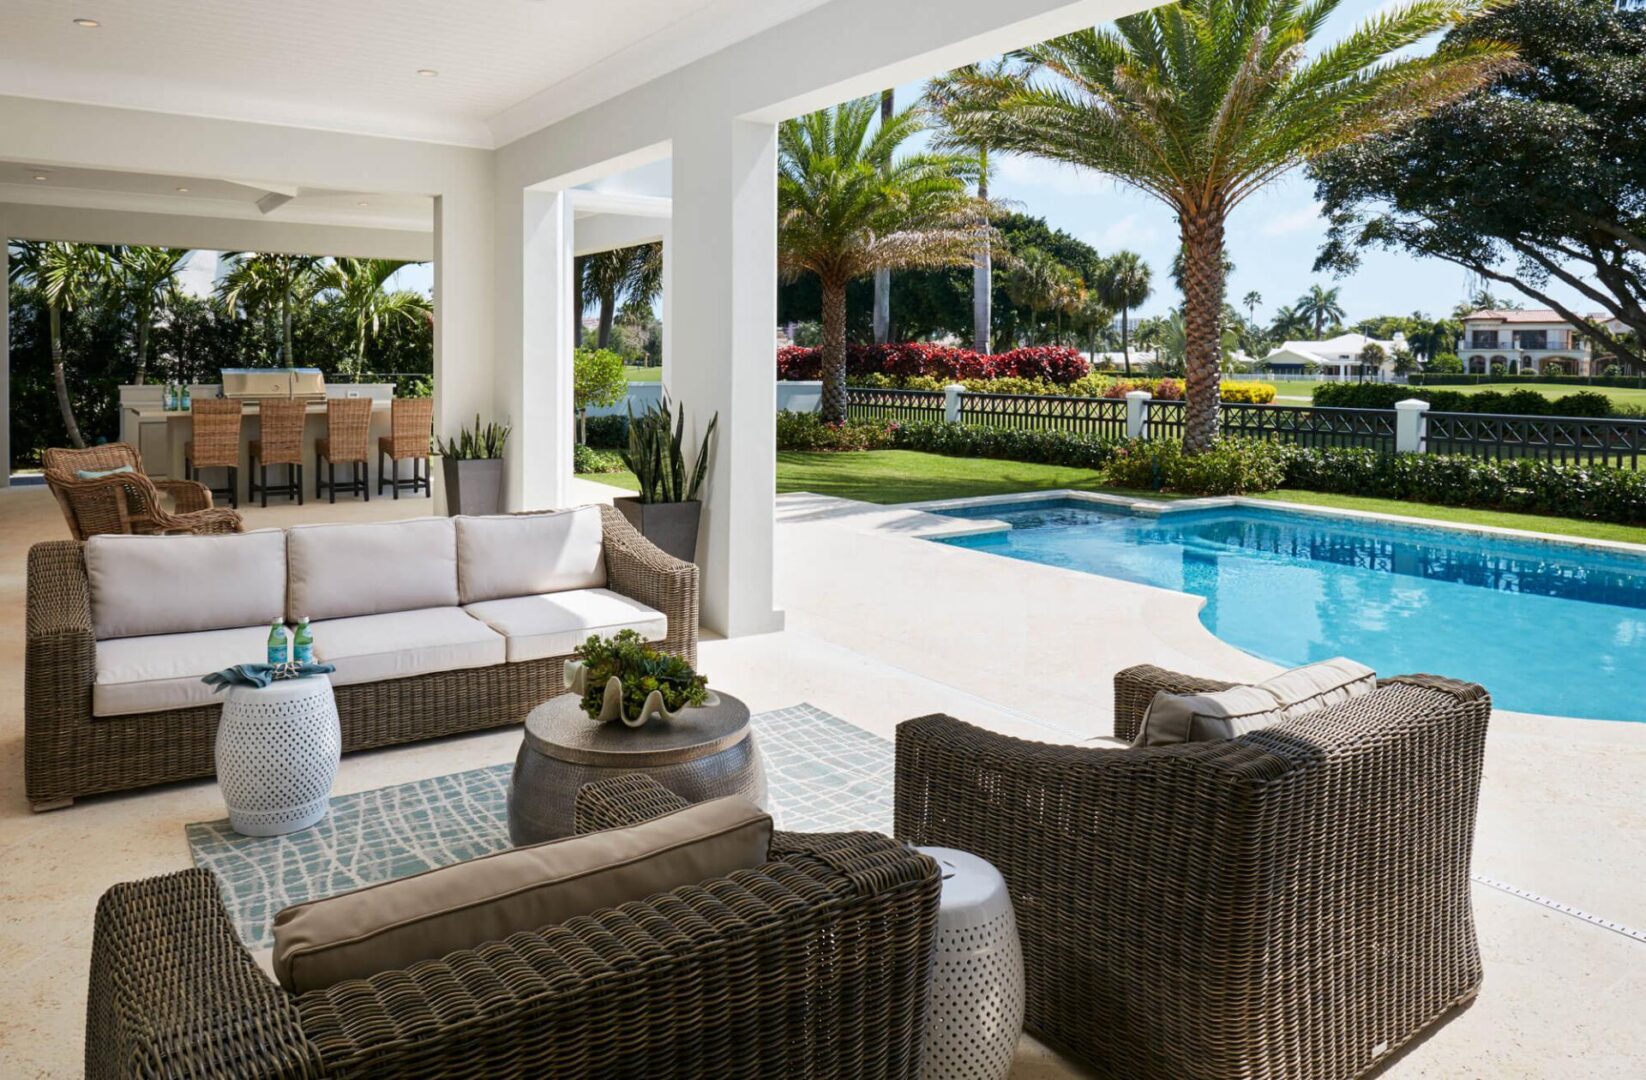 A patio with furniture and pool in the background.